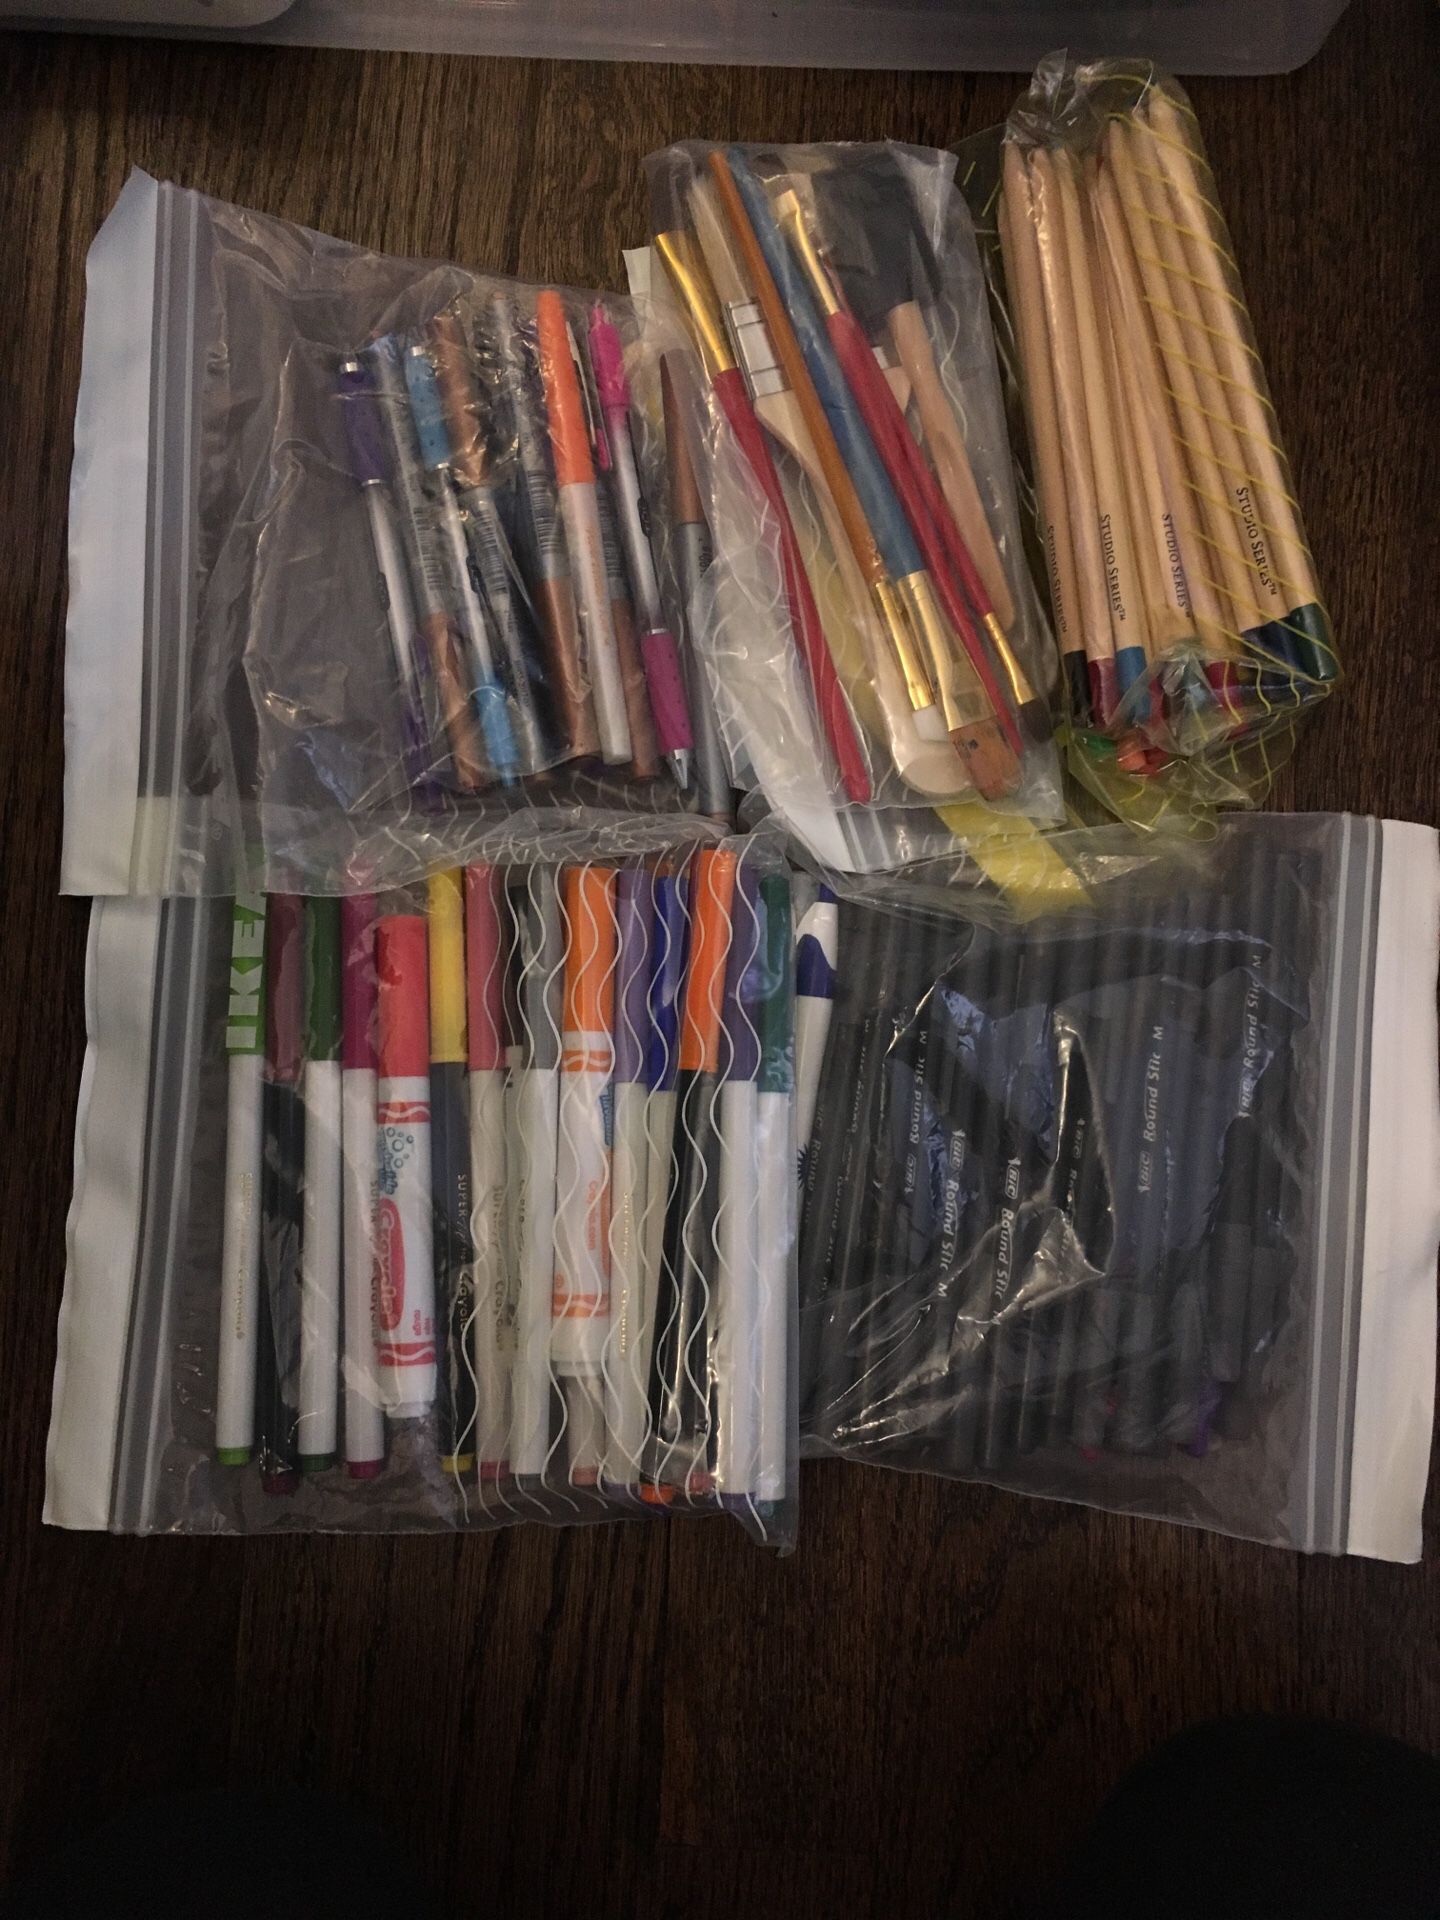 Art supplies. Paint brushes, colored pencils, pens, markers